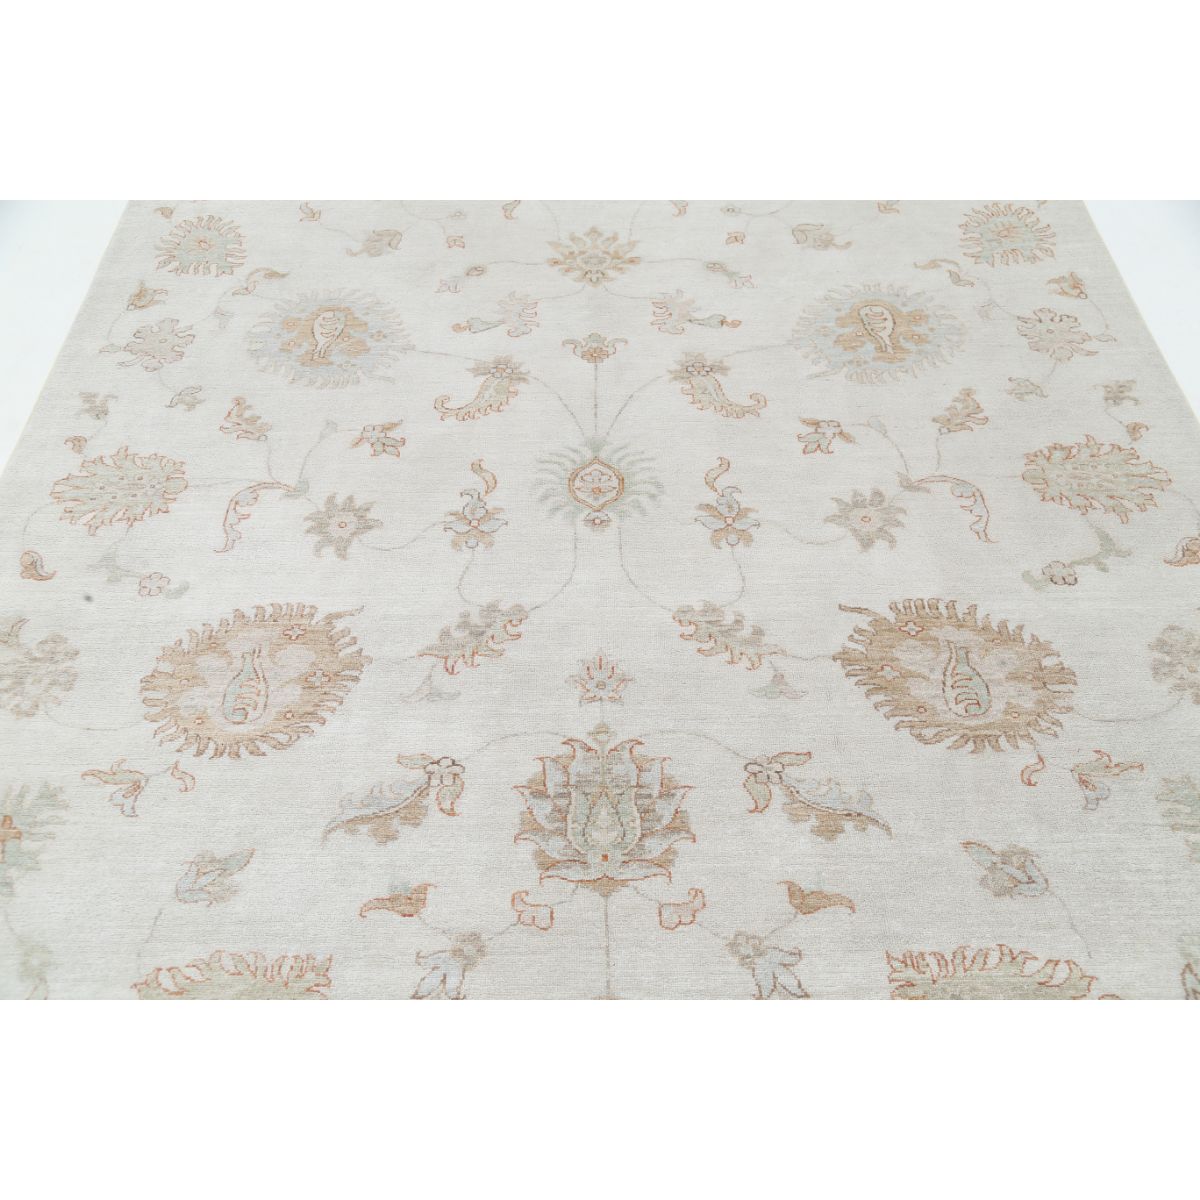 Artemix 6'8" X 9'6" Wool Hand-Knotted Rug